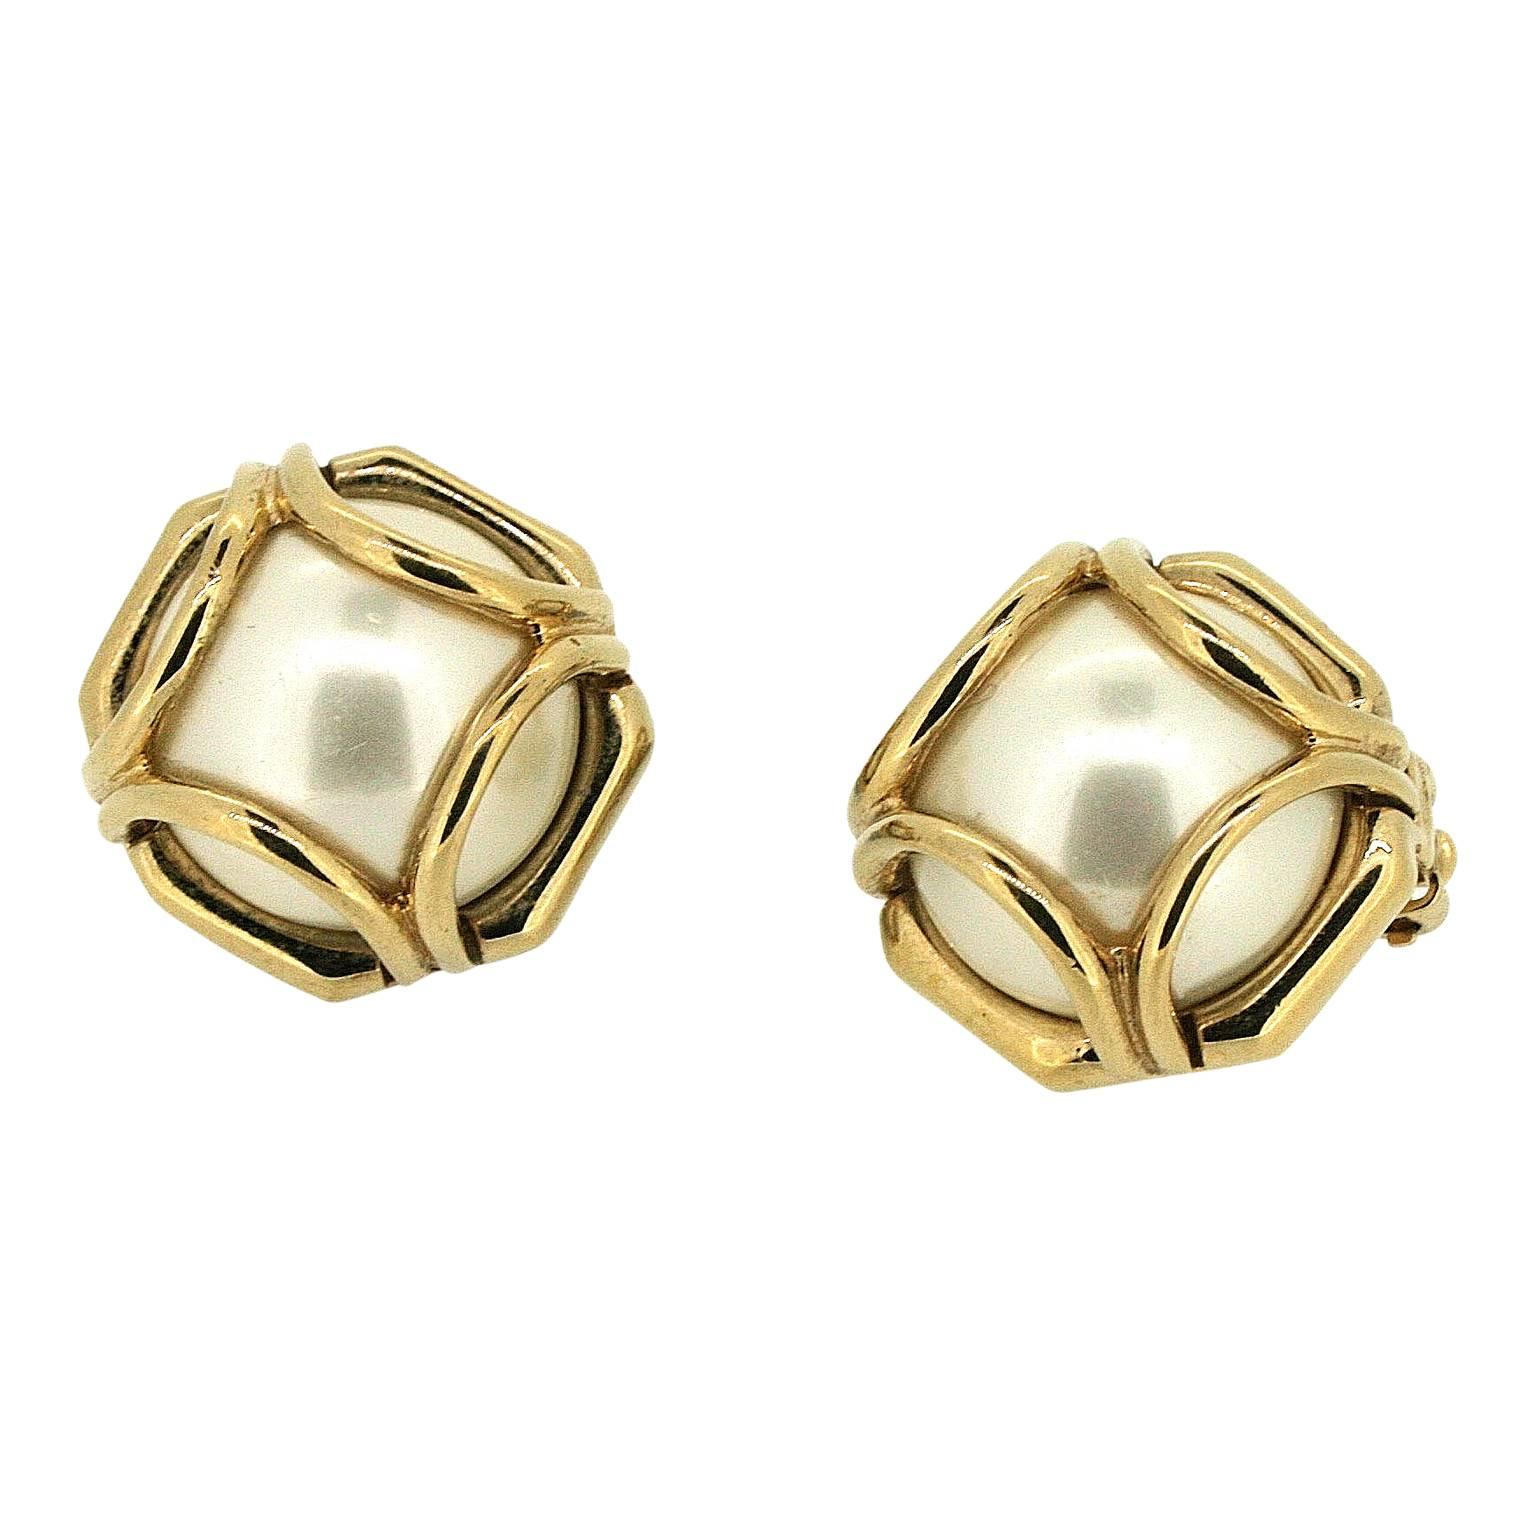 Classic and elegant, these earrings date from the 1980s and were made by Ciner.
Condition Report:
Excellent
The Details...
These earrings feature a faux pearl cabochon set within a gold tone metal cage design. They are clip on. They are signed. The